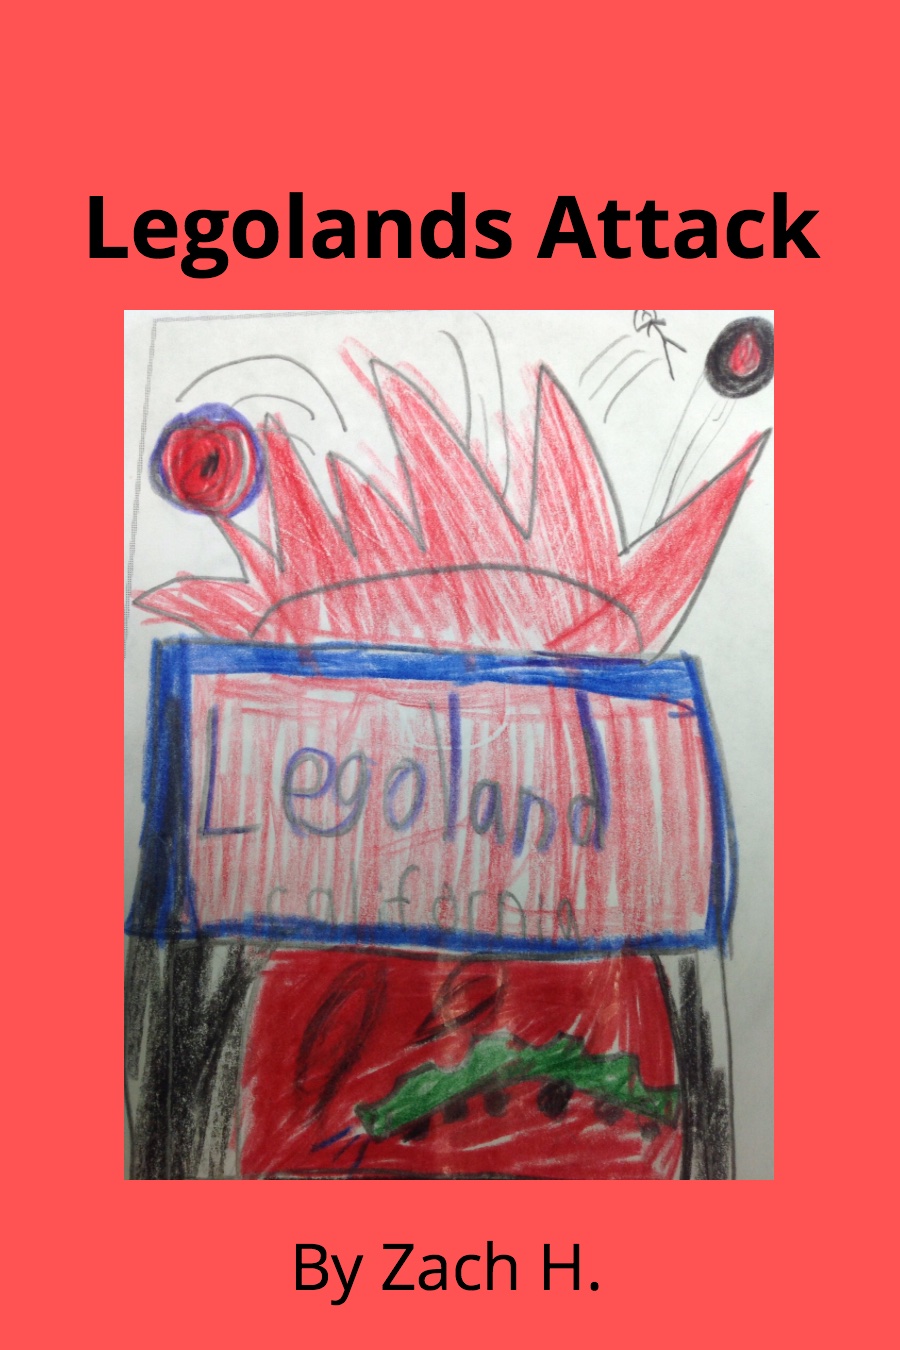 Legolands Attack by Zach H